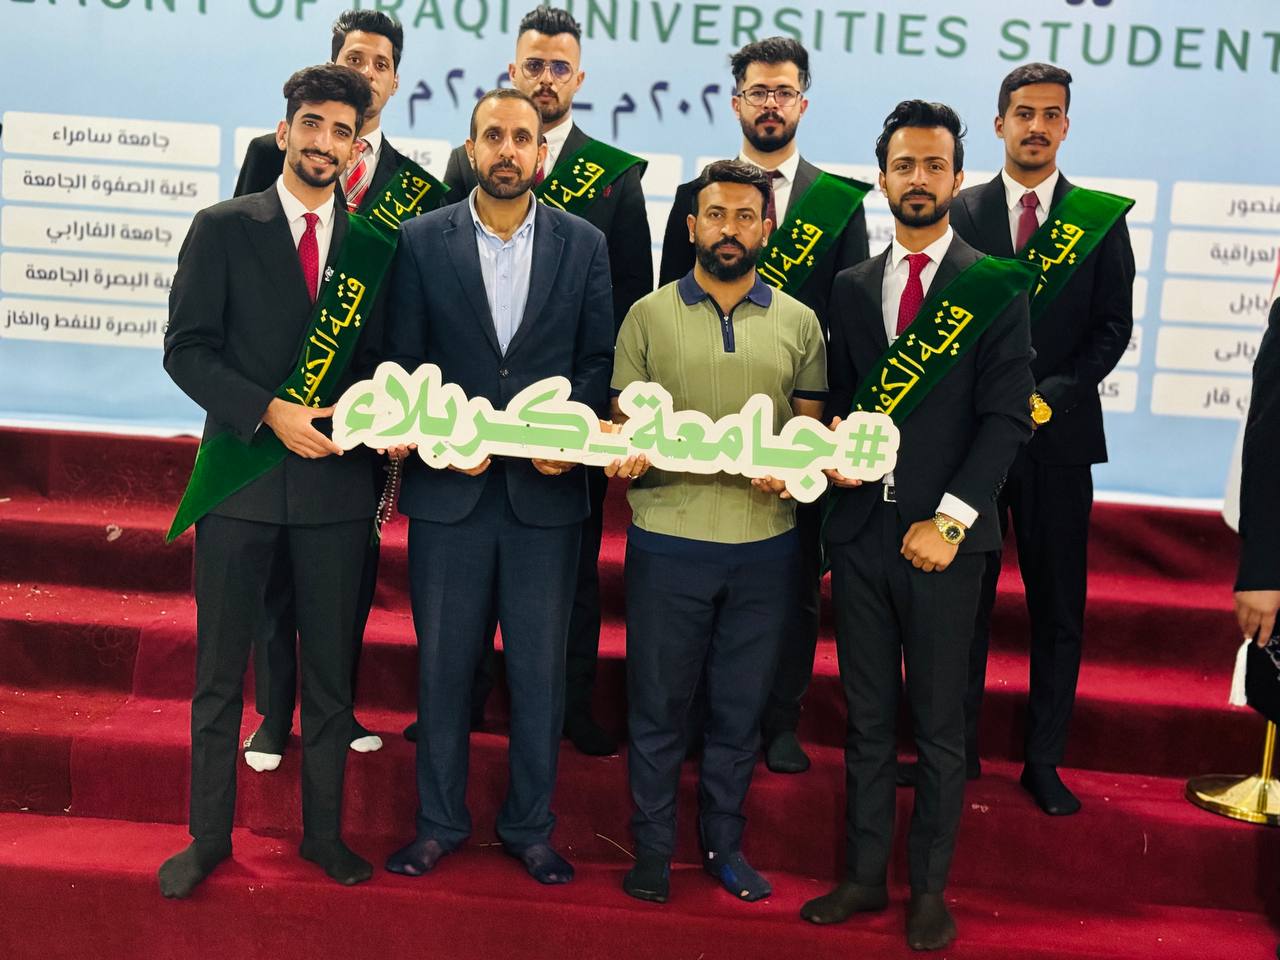 Read more about the article The College of Science participates in the fourth central graduation ceremony for Iraqi universities’ students.